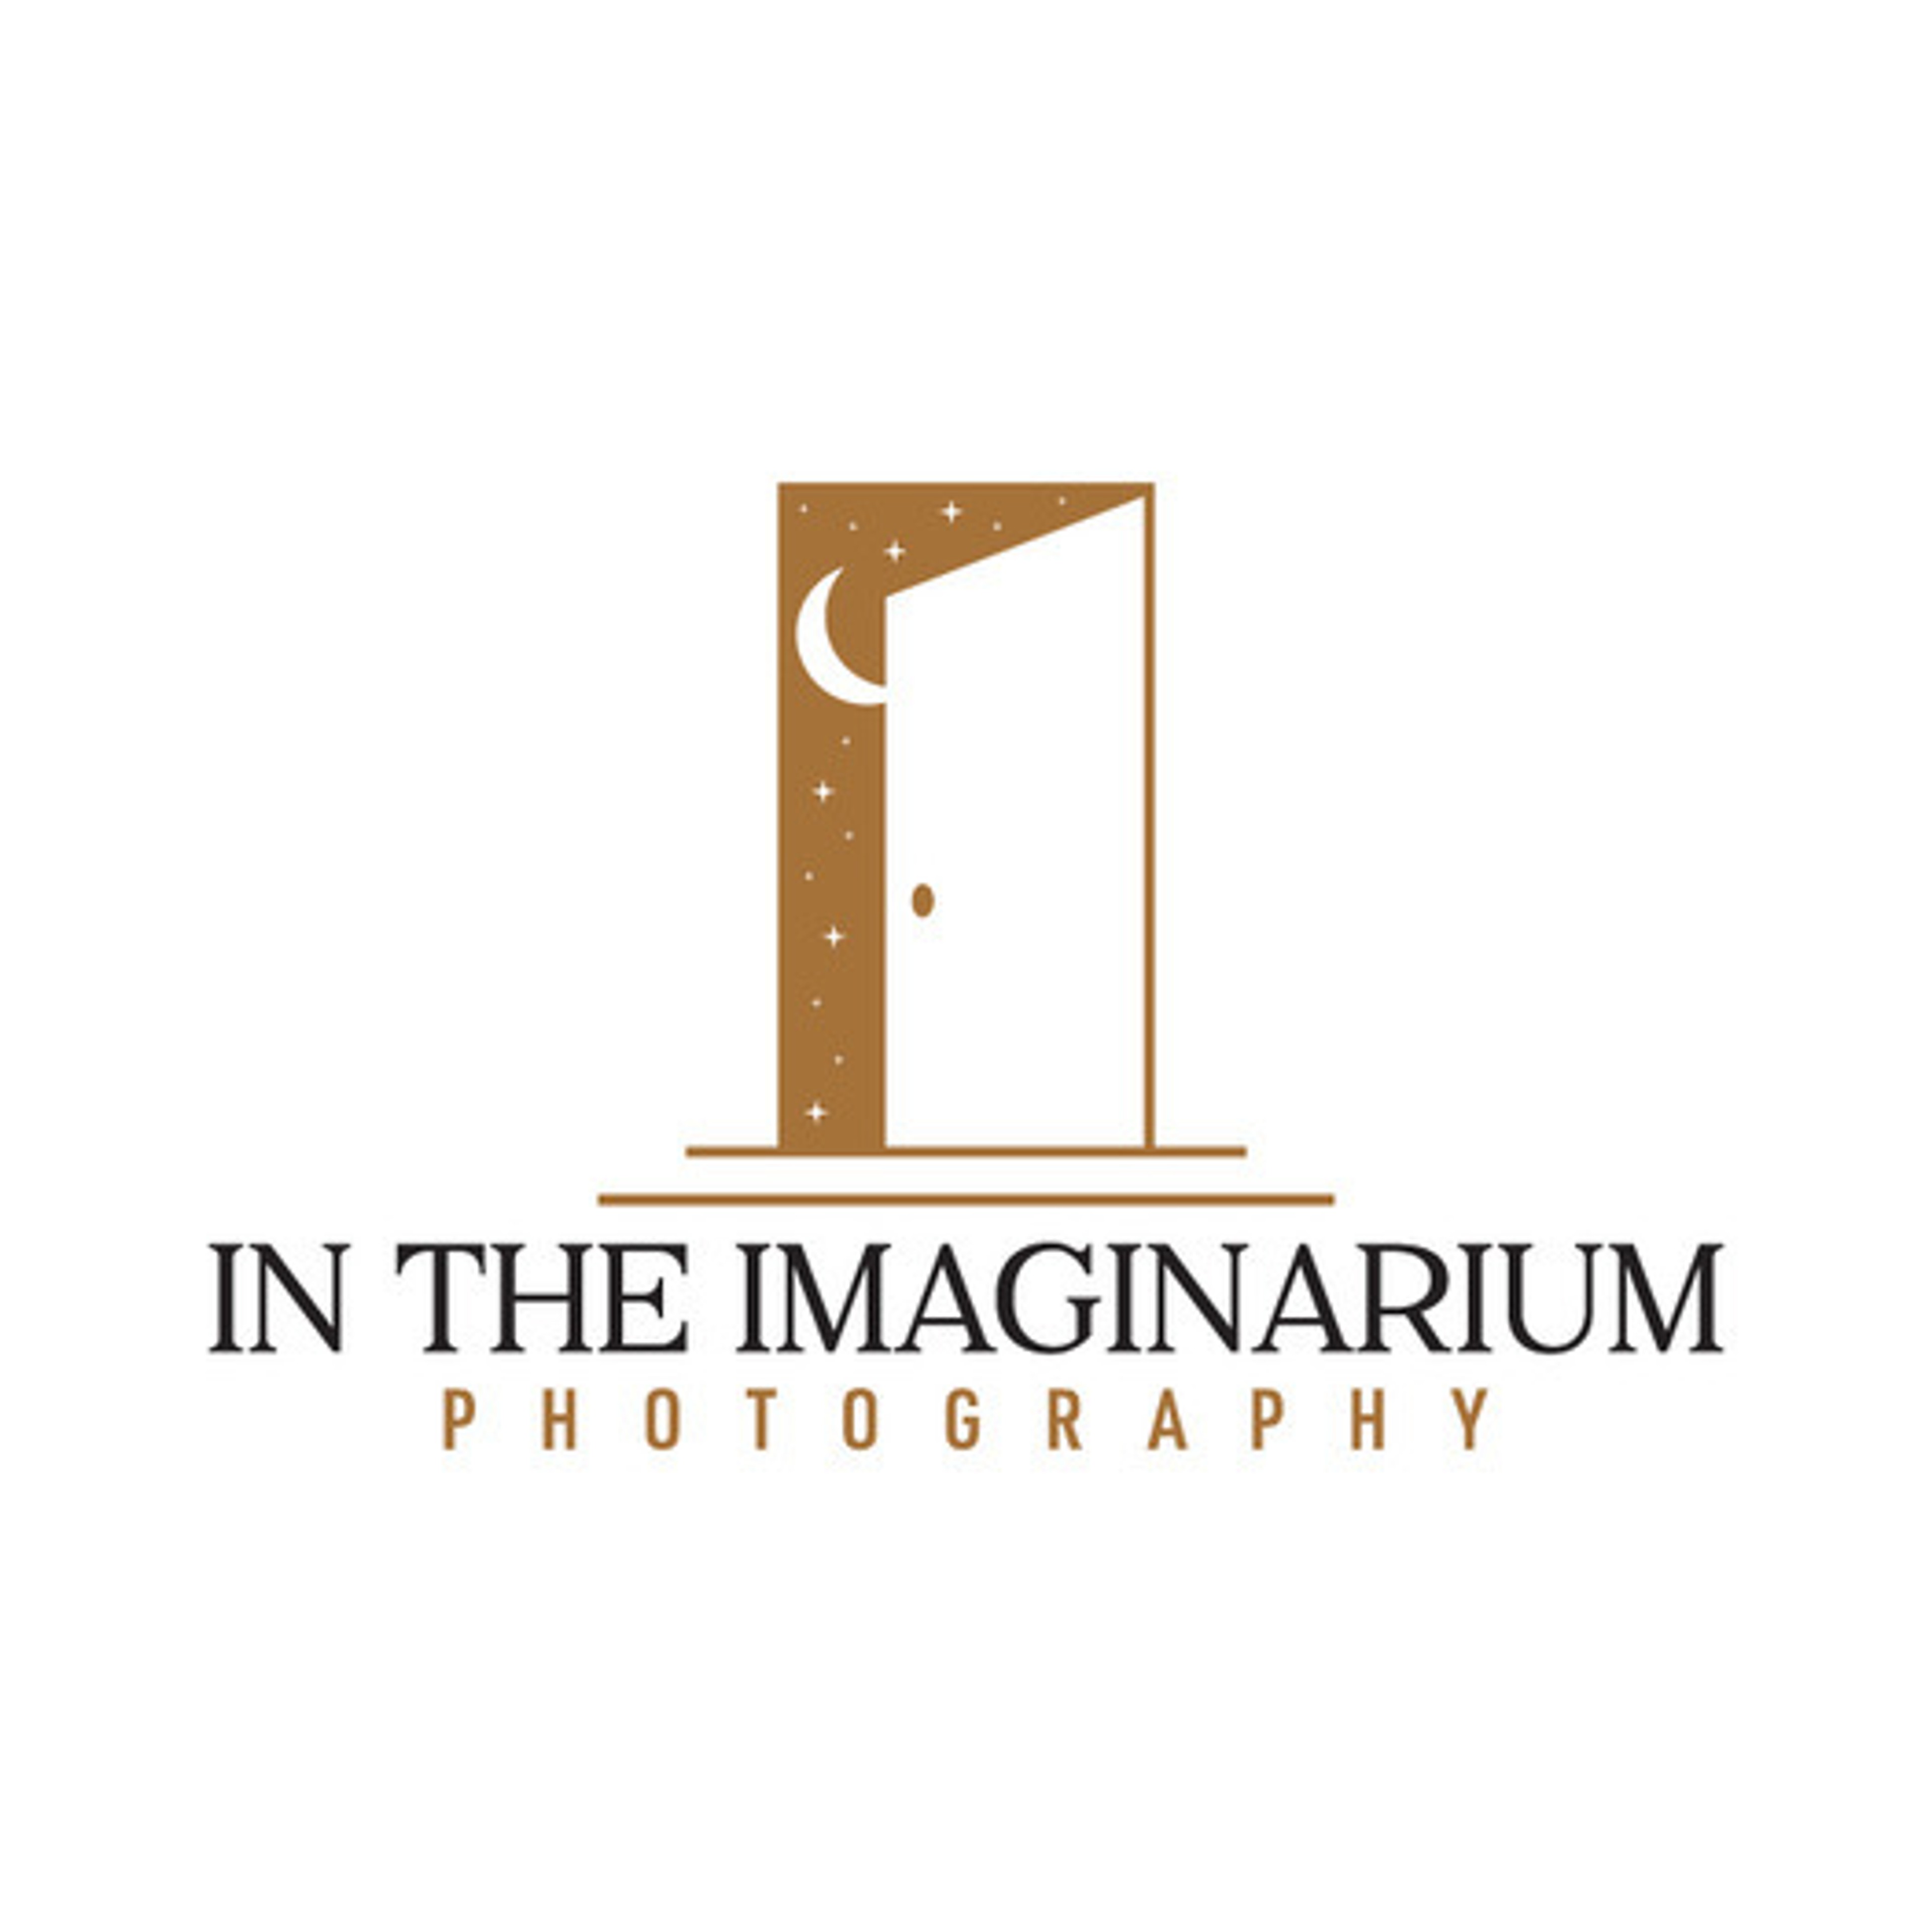 Hire In the Imaginarium to open the door to creativity and step into a world of your imagination